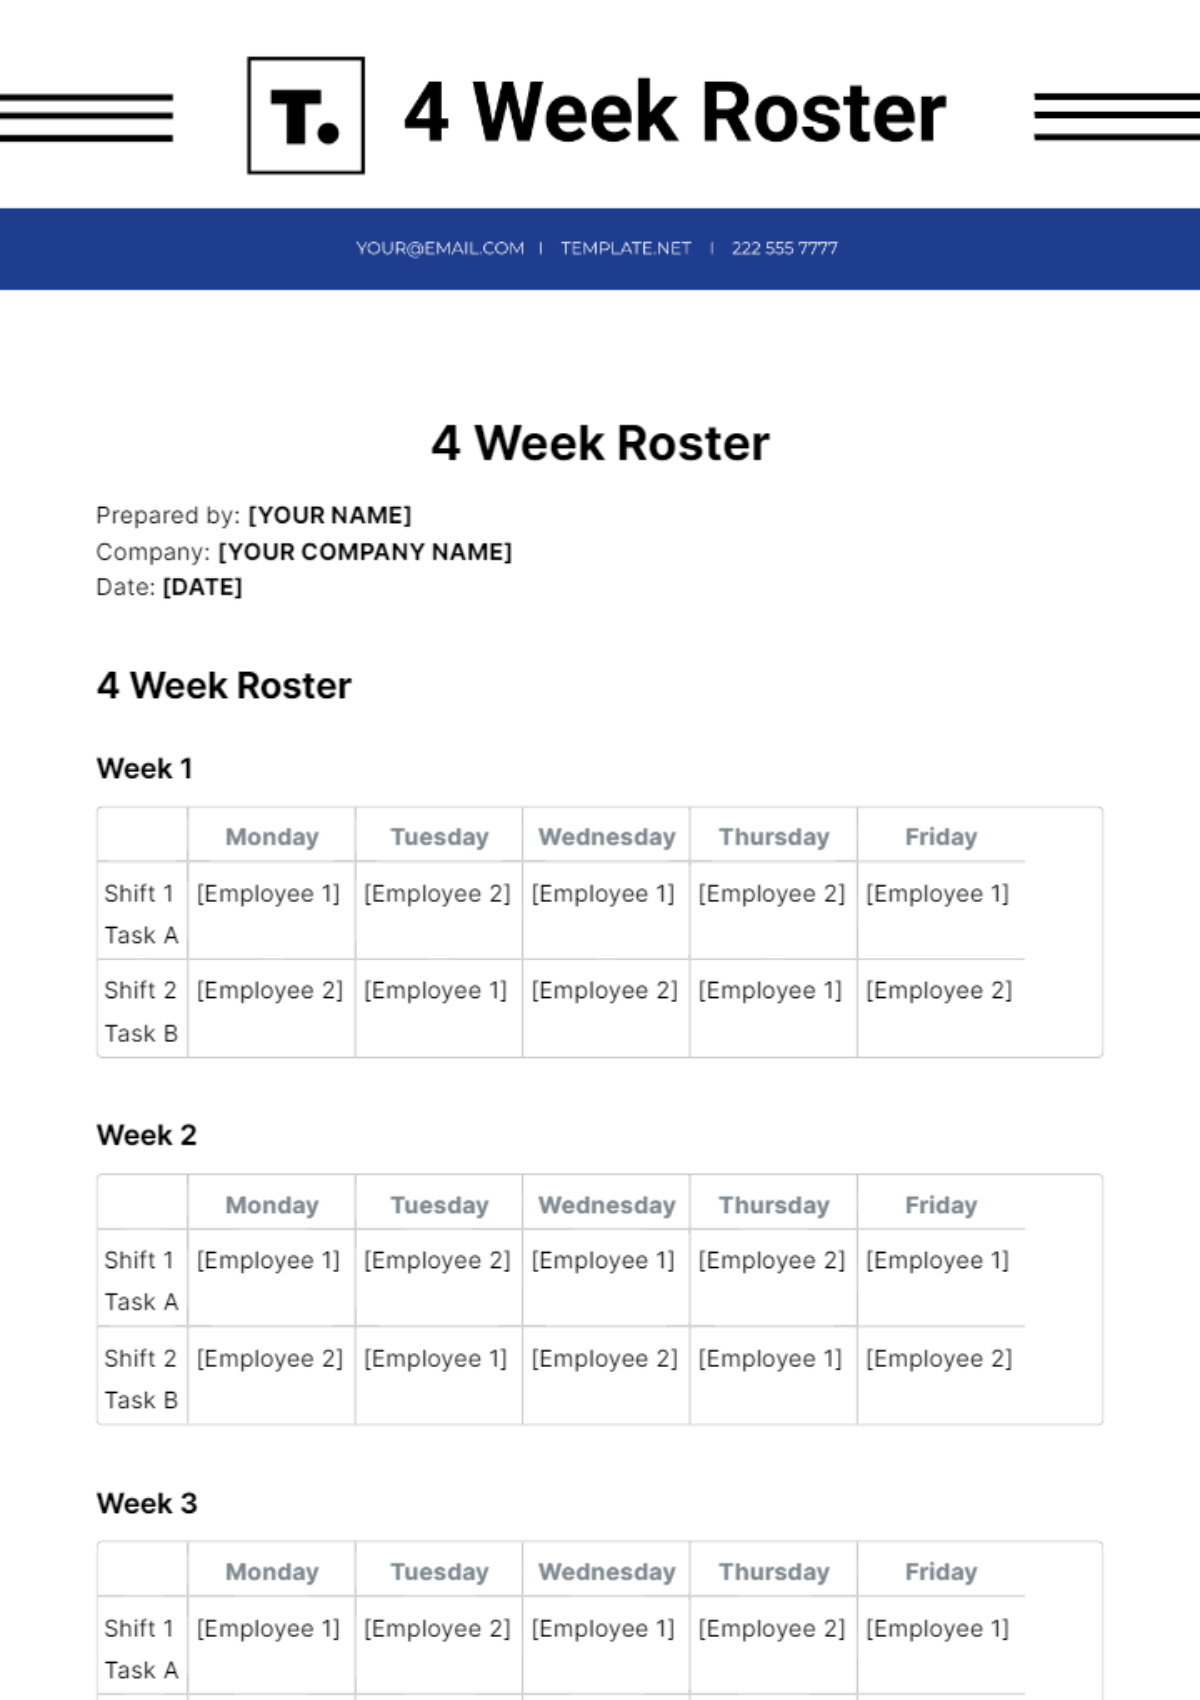 4 Week Roster Template